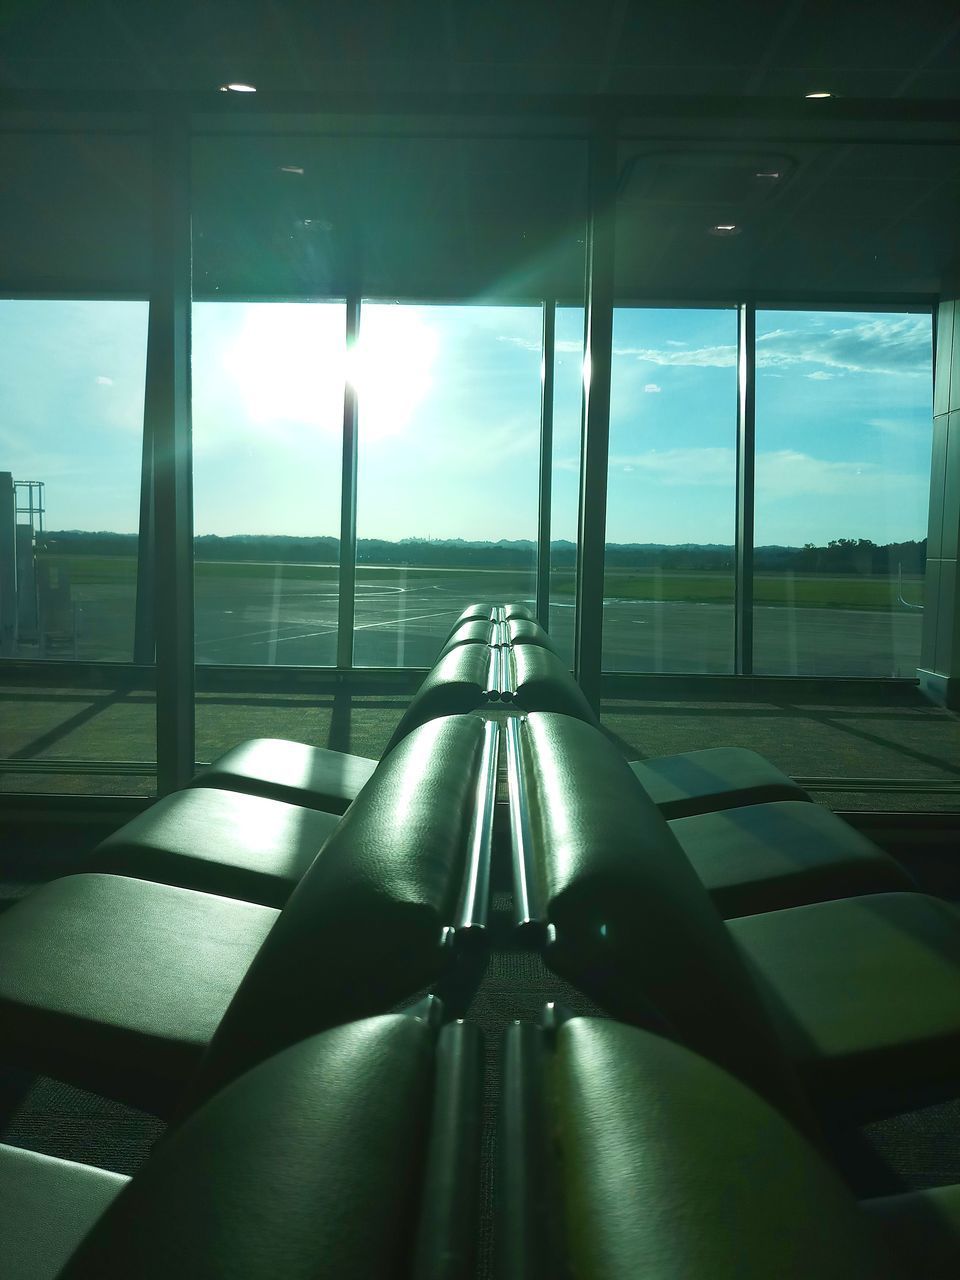 VIEW OF AIRPORT THROUGH WINDOW